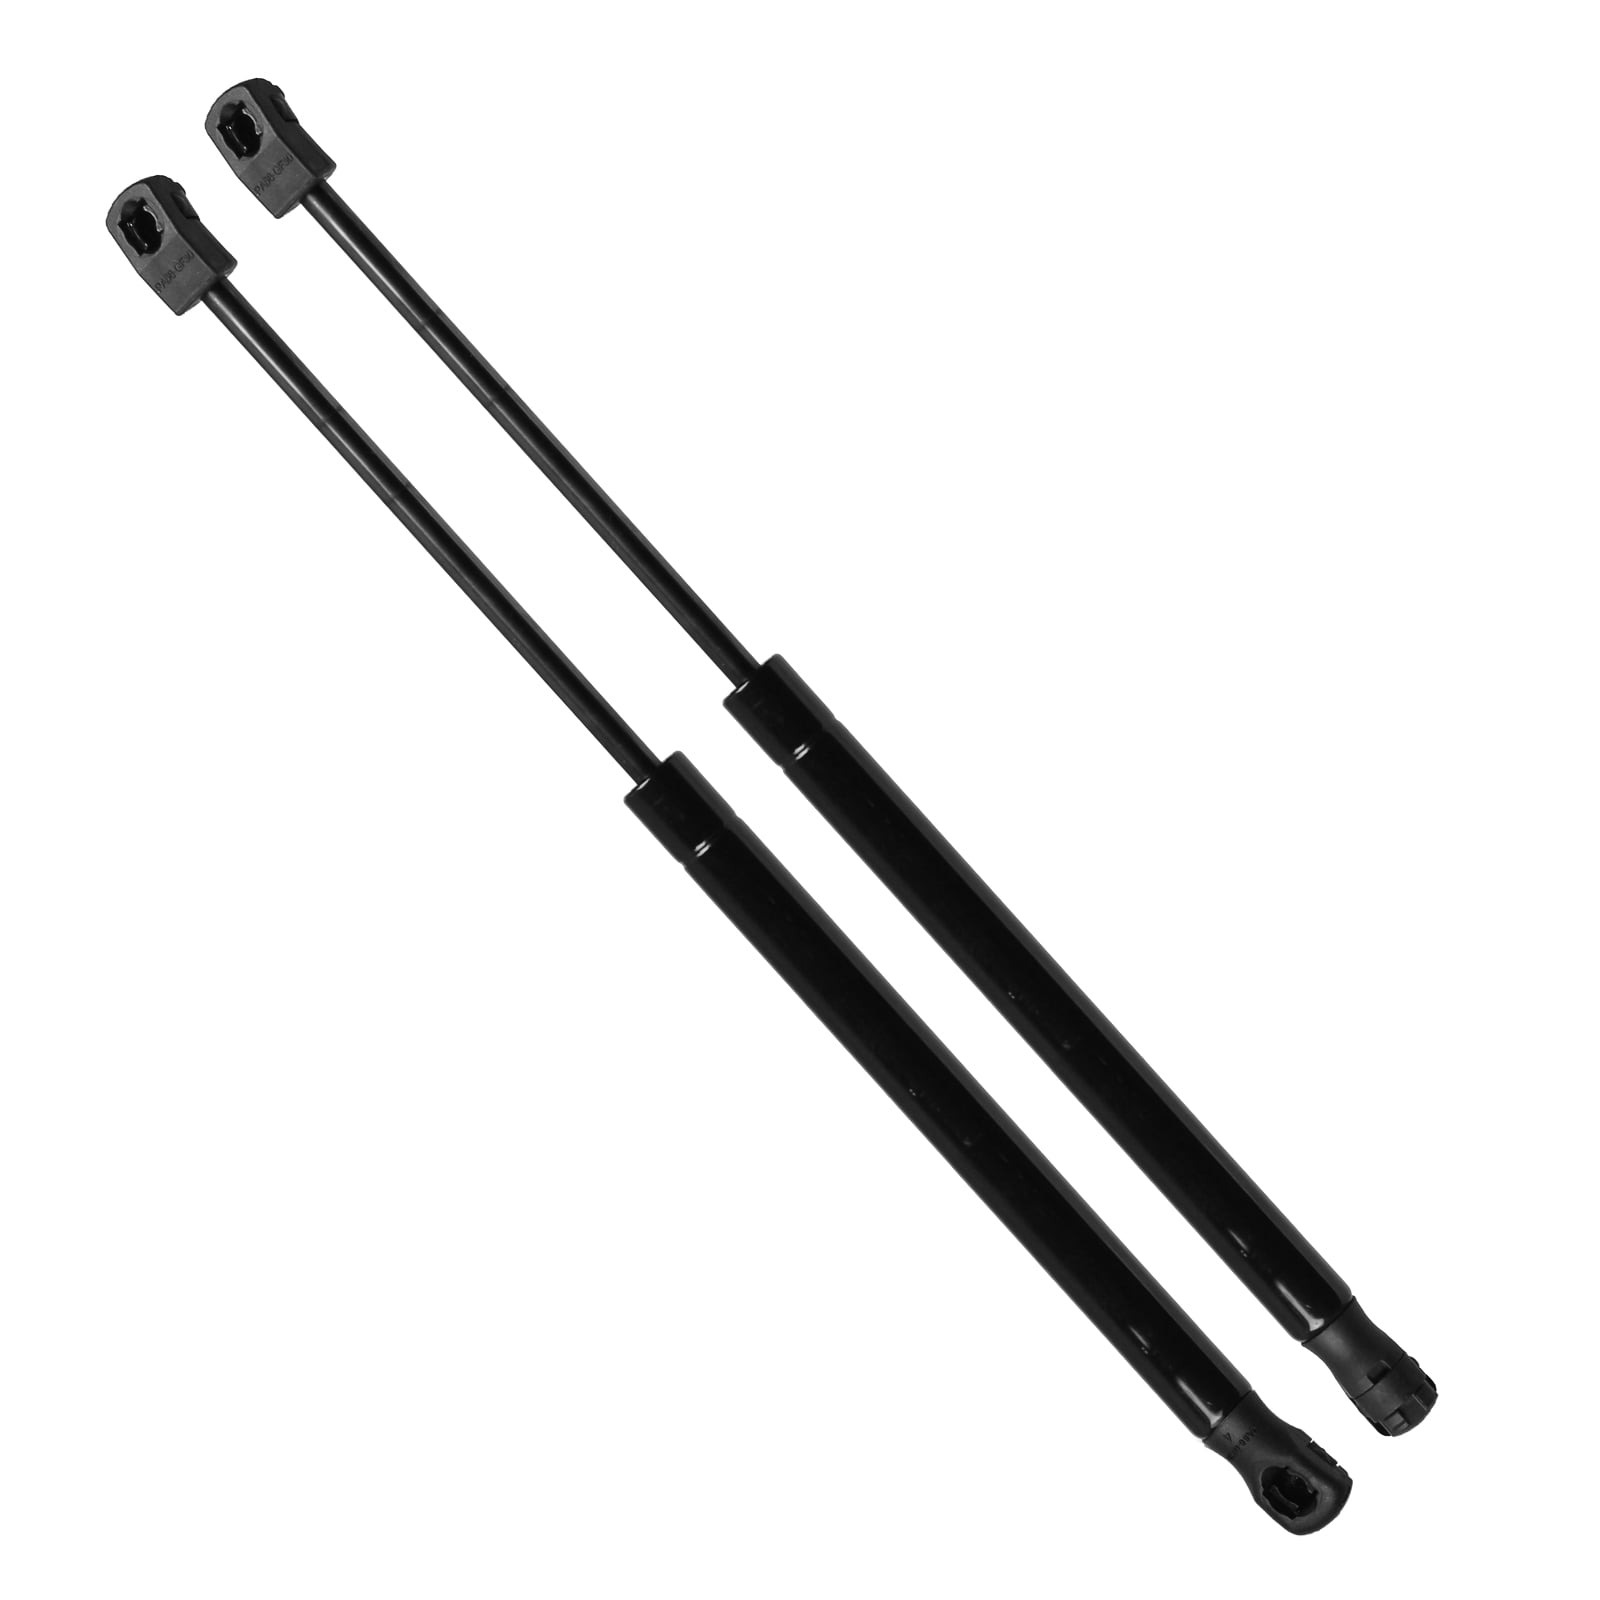 2pcs Rear Trunk Lift Supports Struts Gas Spring 6191L-R for Toyota